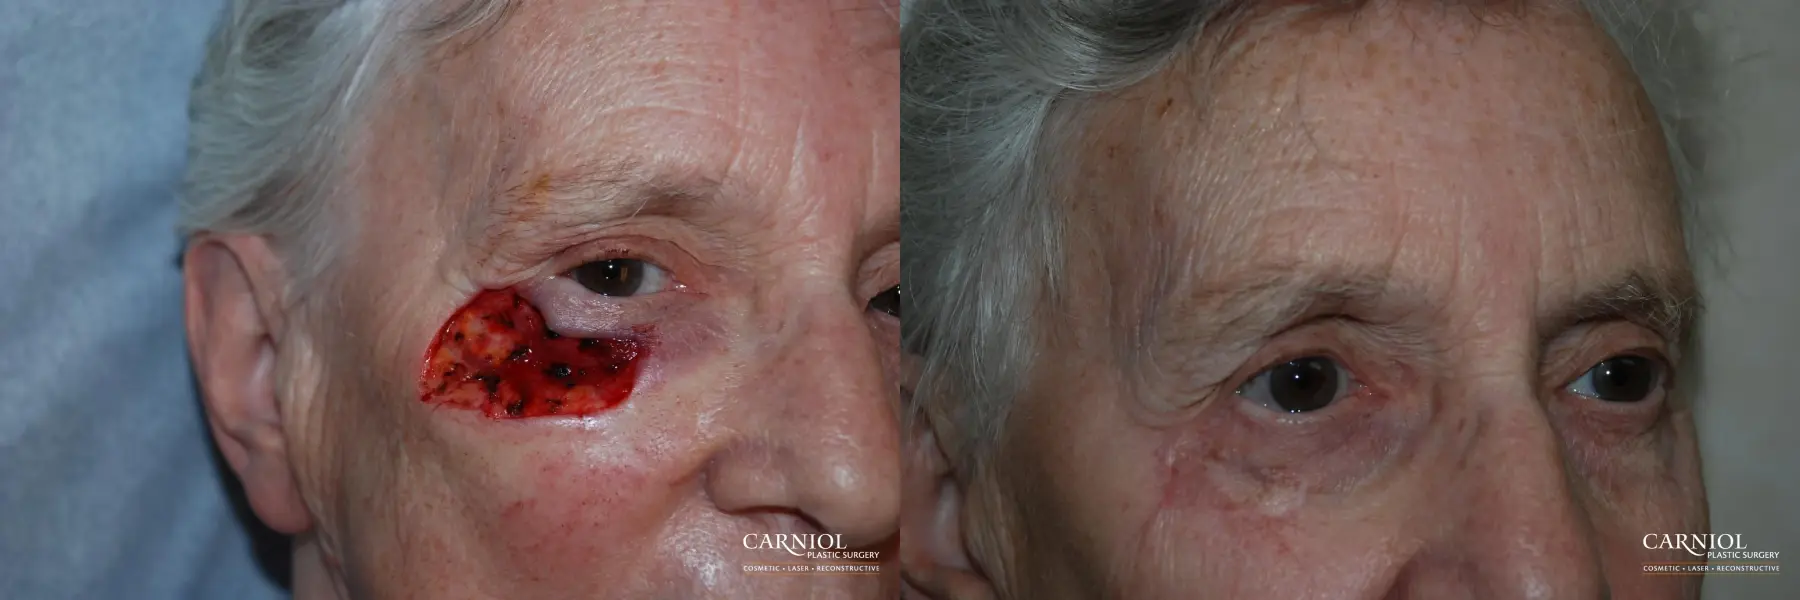 Skin Cancer Reconstruction - Face: Patient 5 - Before and After  